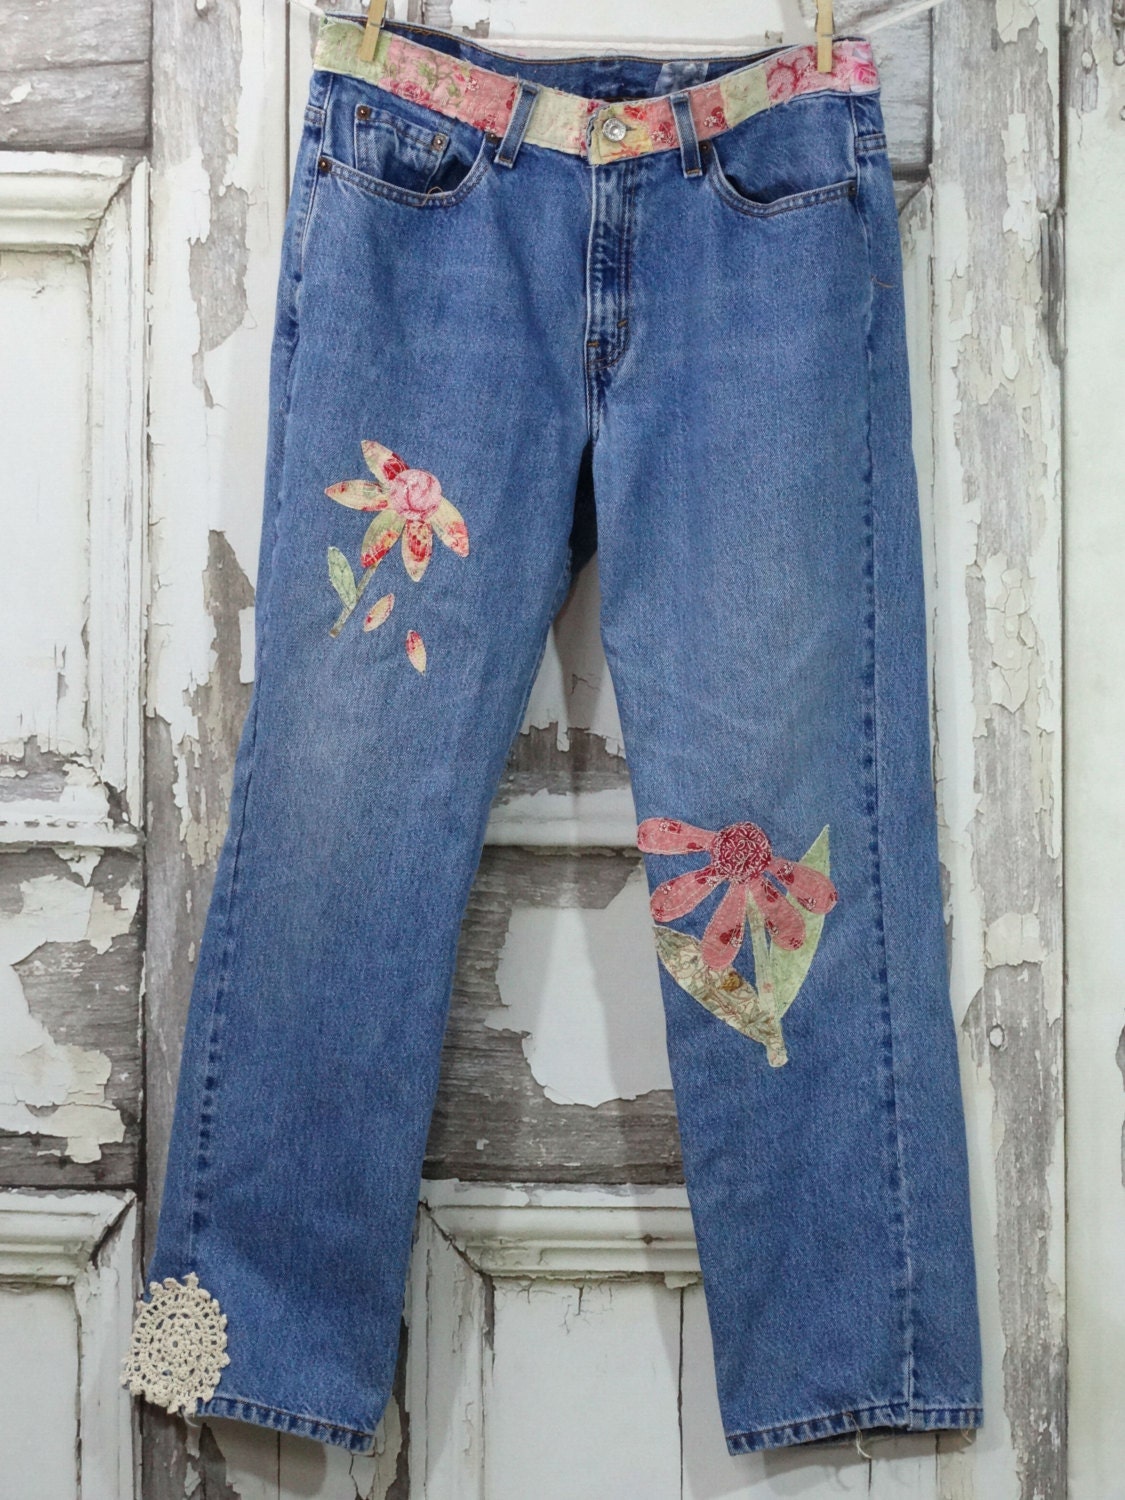 Reserved Hippy Patched Denim Jeans Floral by CuriousOrangeCat